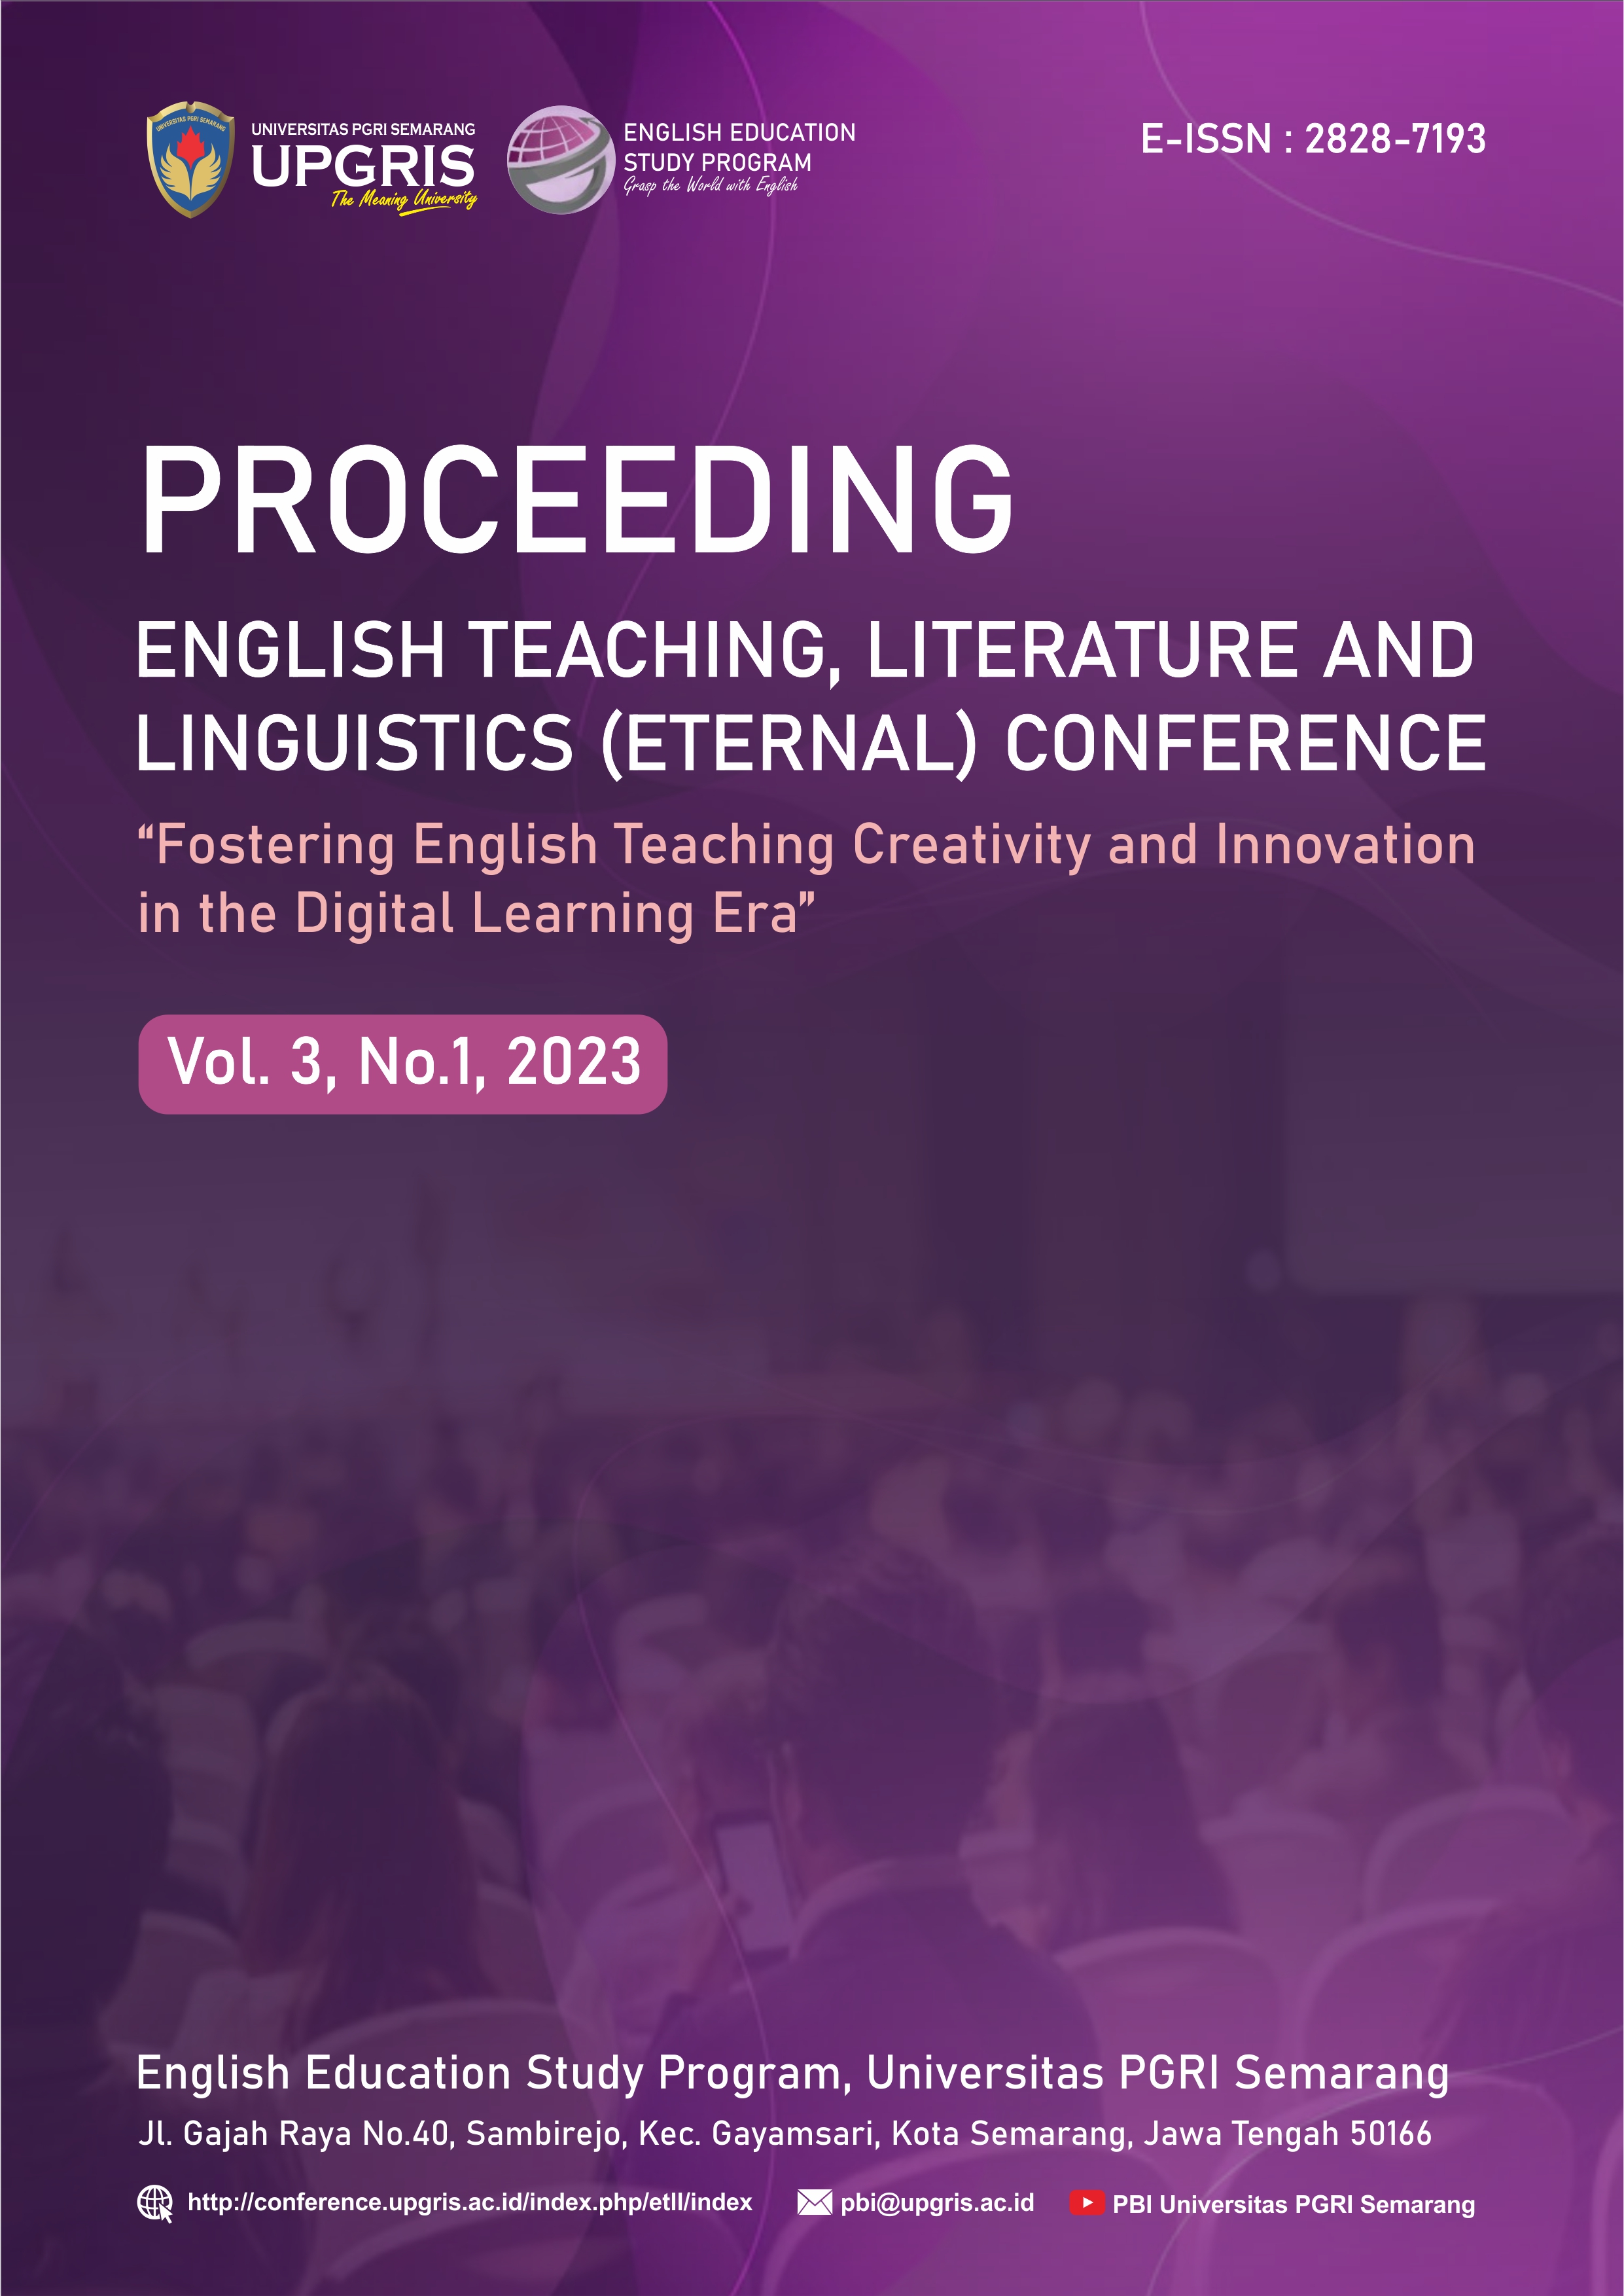 					View Vol. 3 No. 1 (2023): PROCEEDING OF ENGLISH TEACHING, LITERATURE AND LINGUISTICS (ETERNAL) CONFERENCE
				